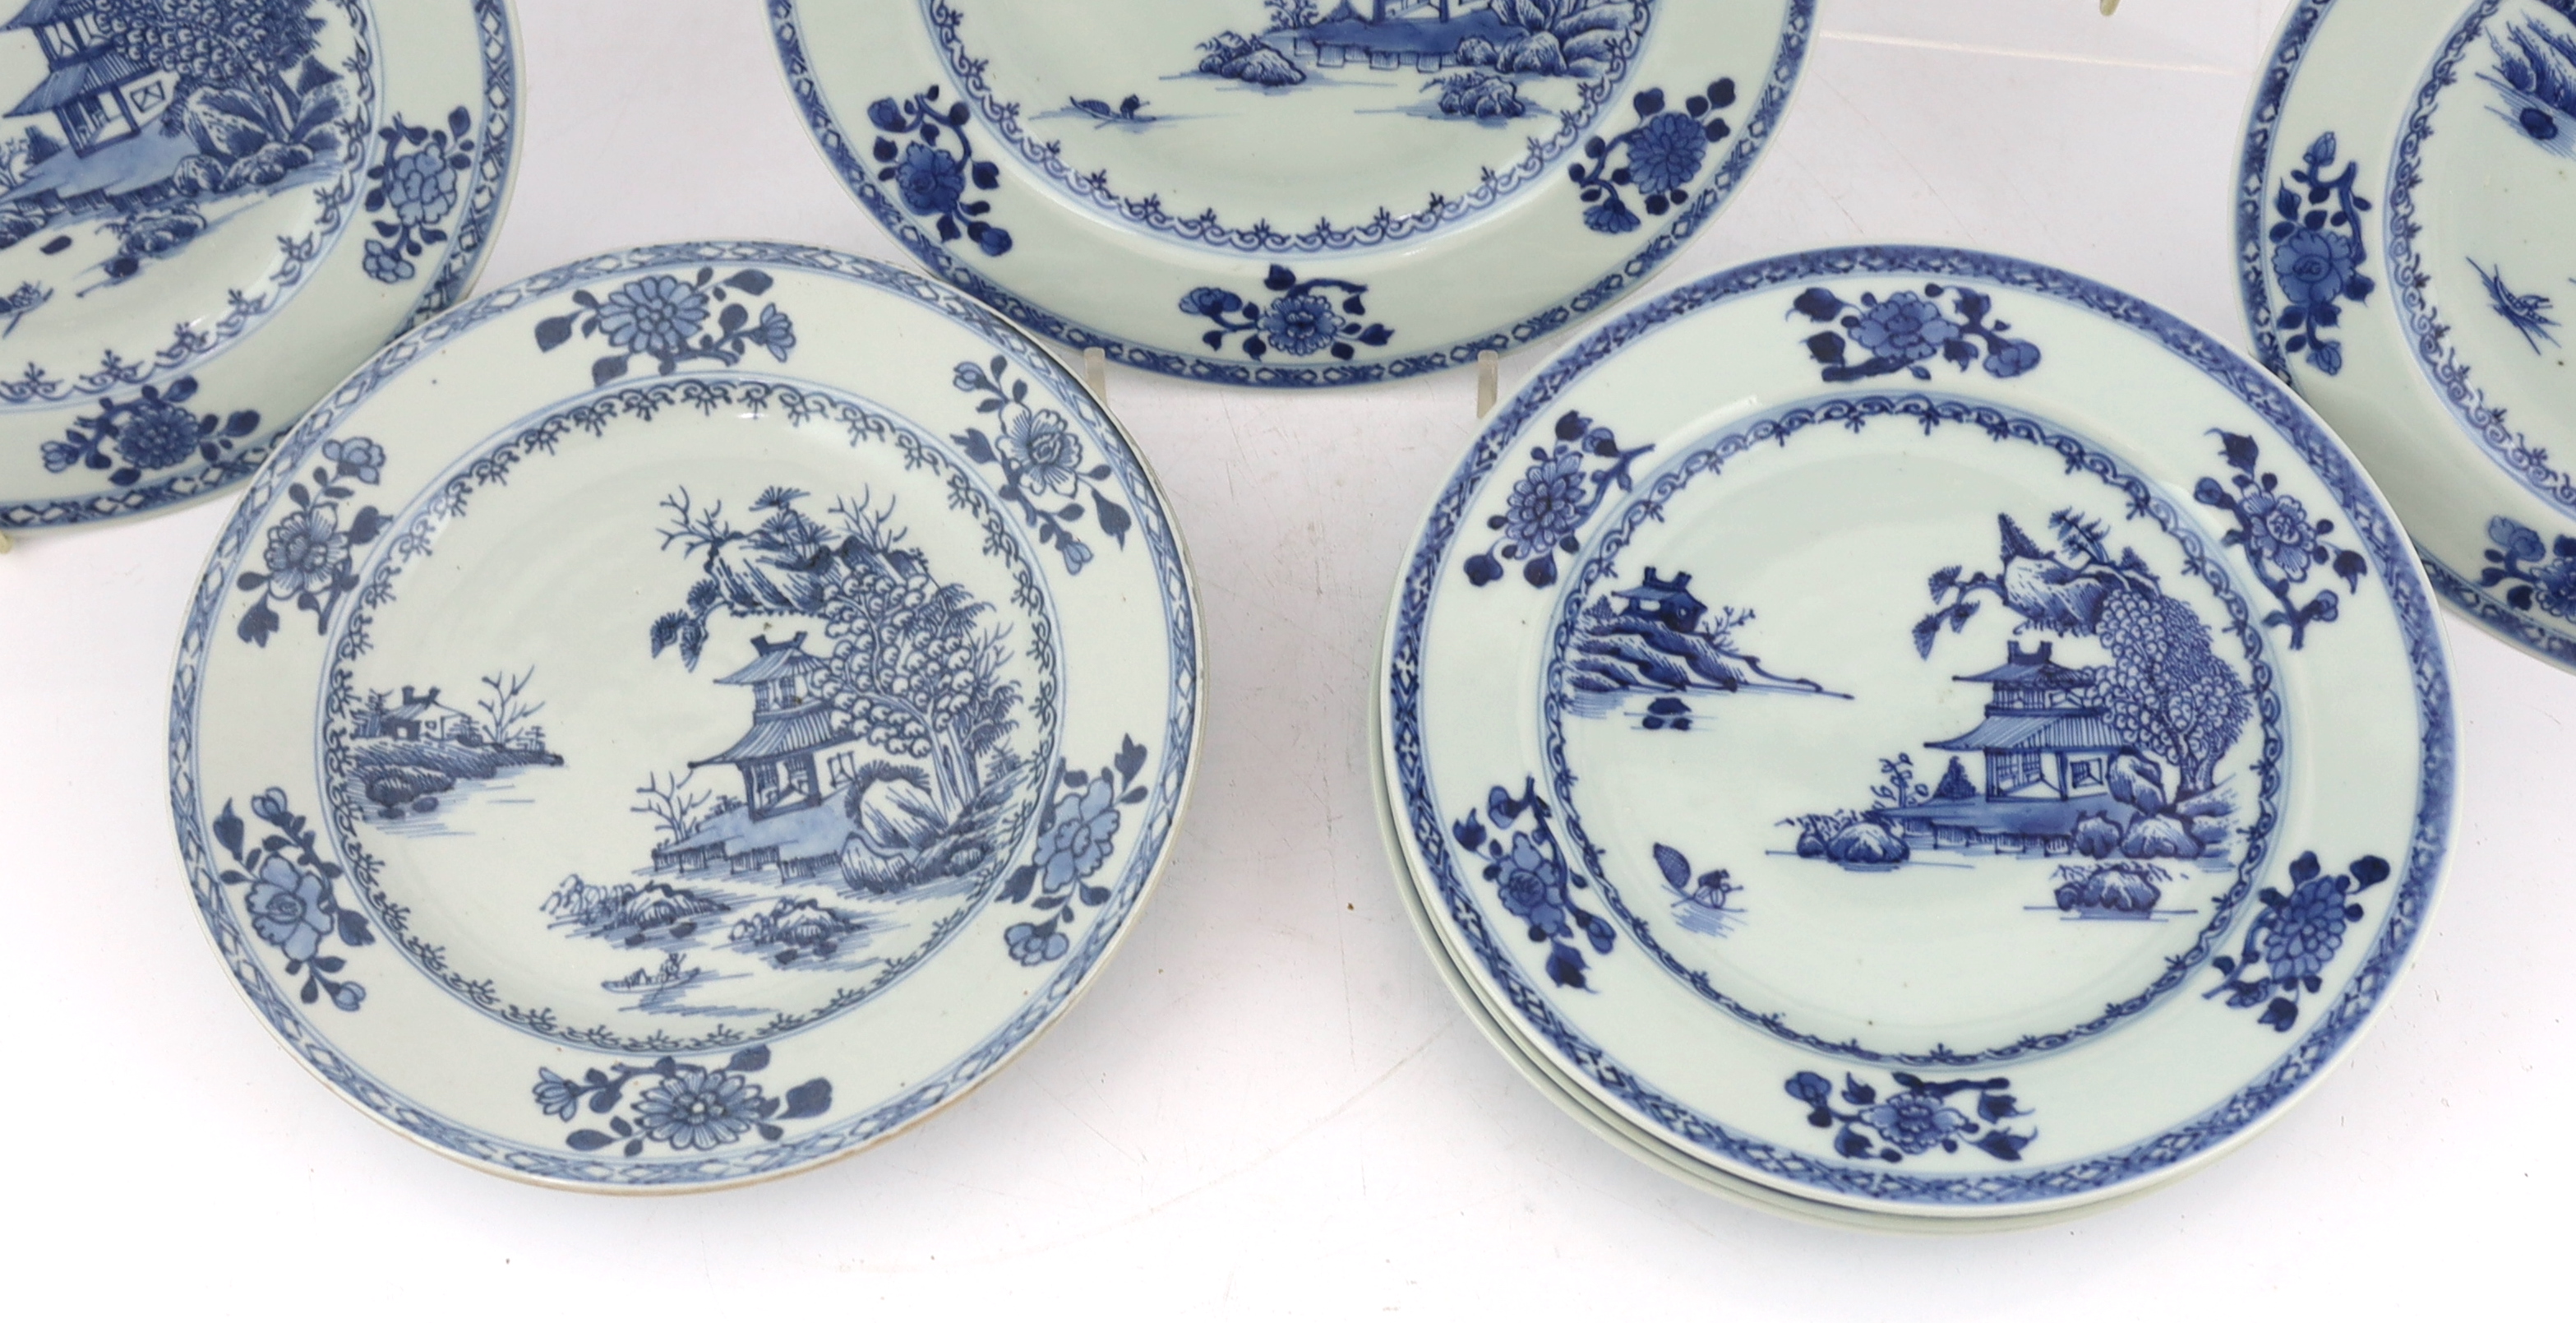 A set of twelve Chinese Nanking Cargo ‘Boatman’ blue and white plates, Qianlong period